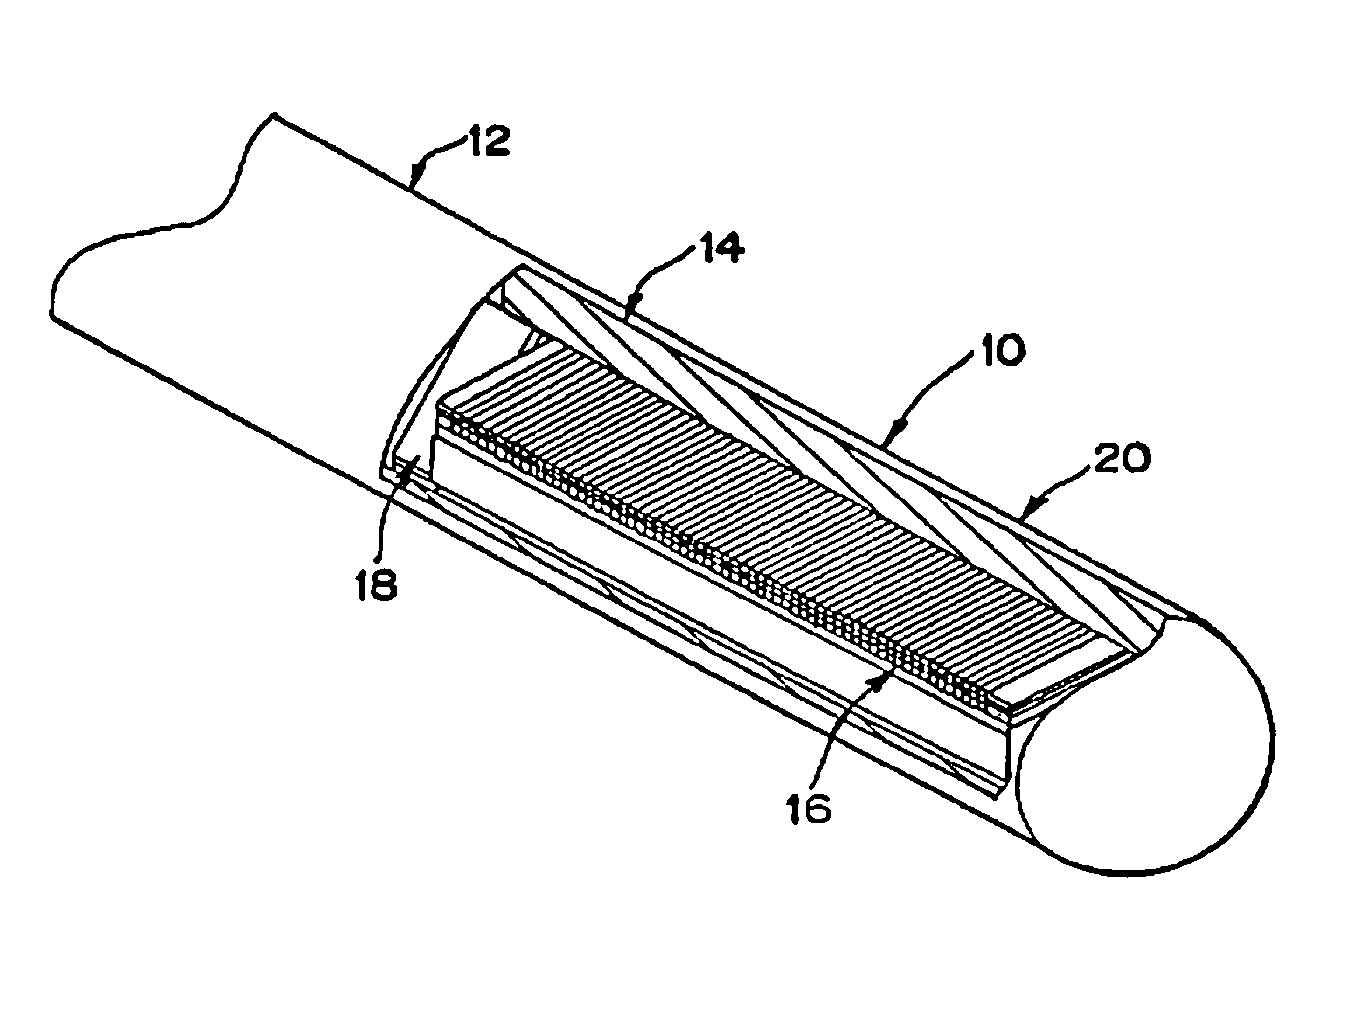 Medical diagnostic ultrasound catheter with dielectric isolation